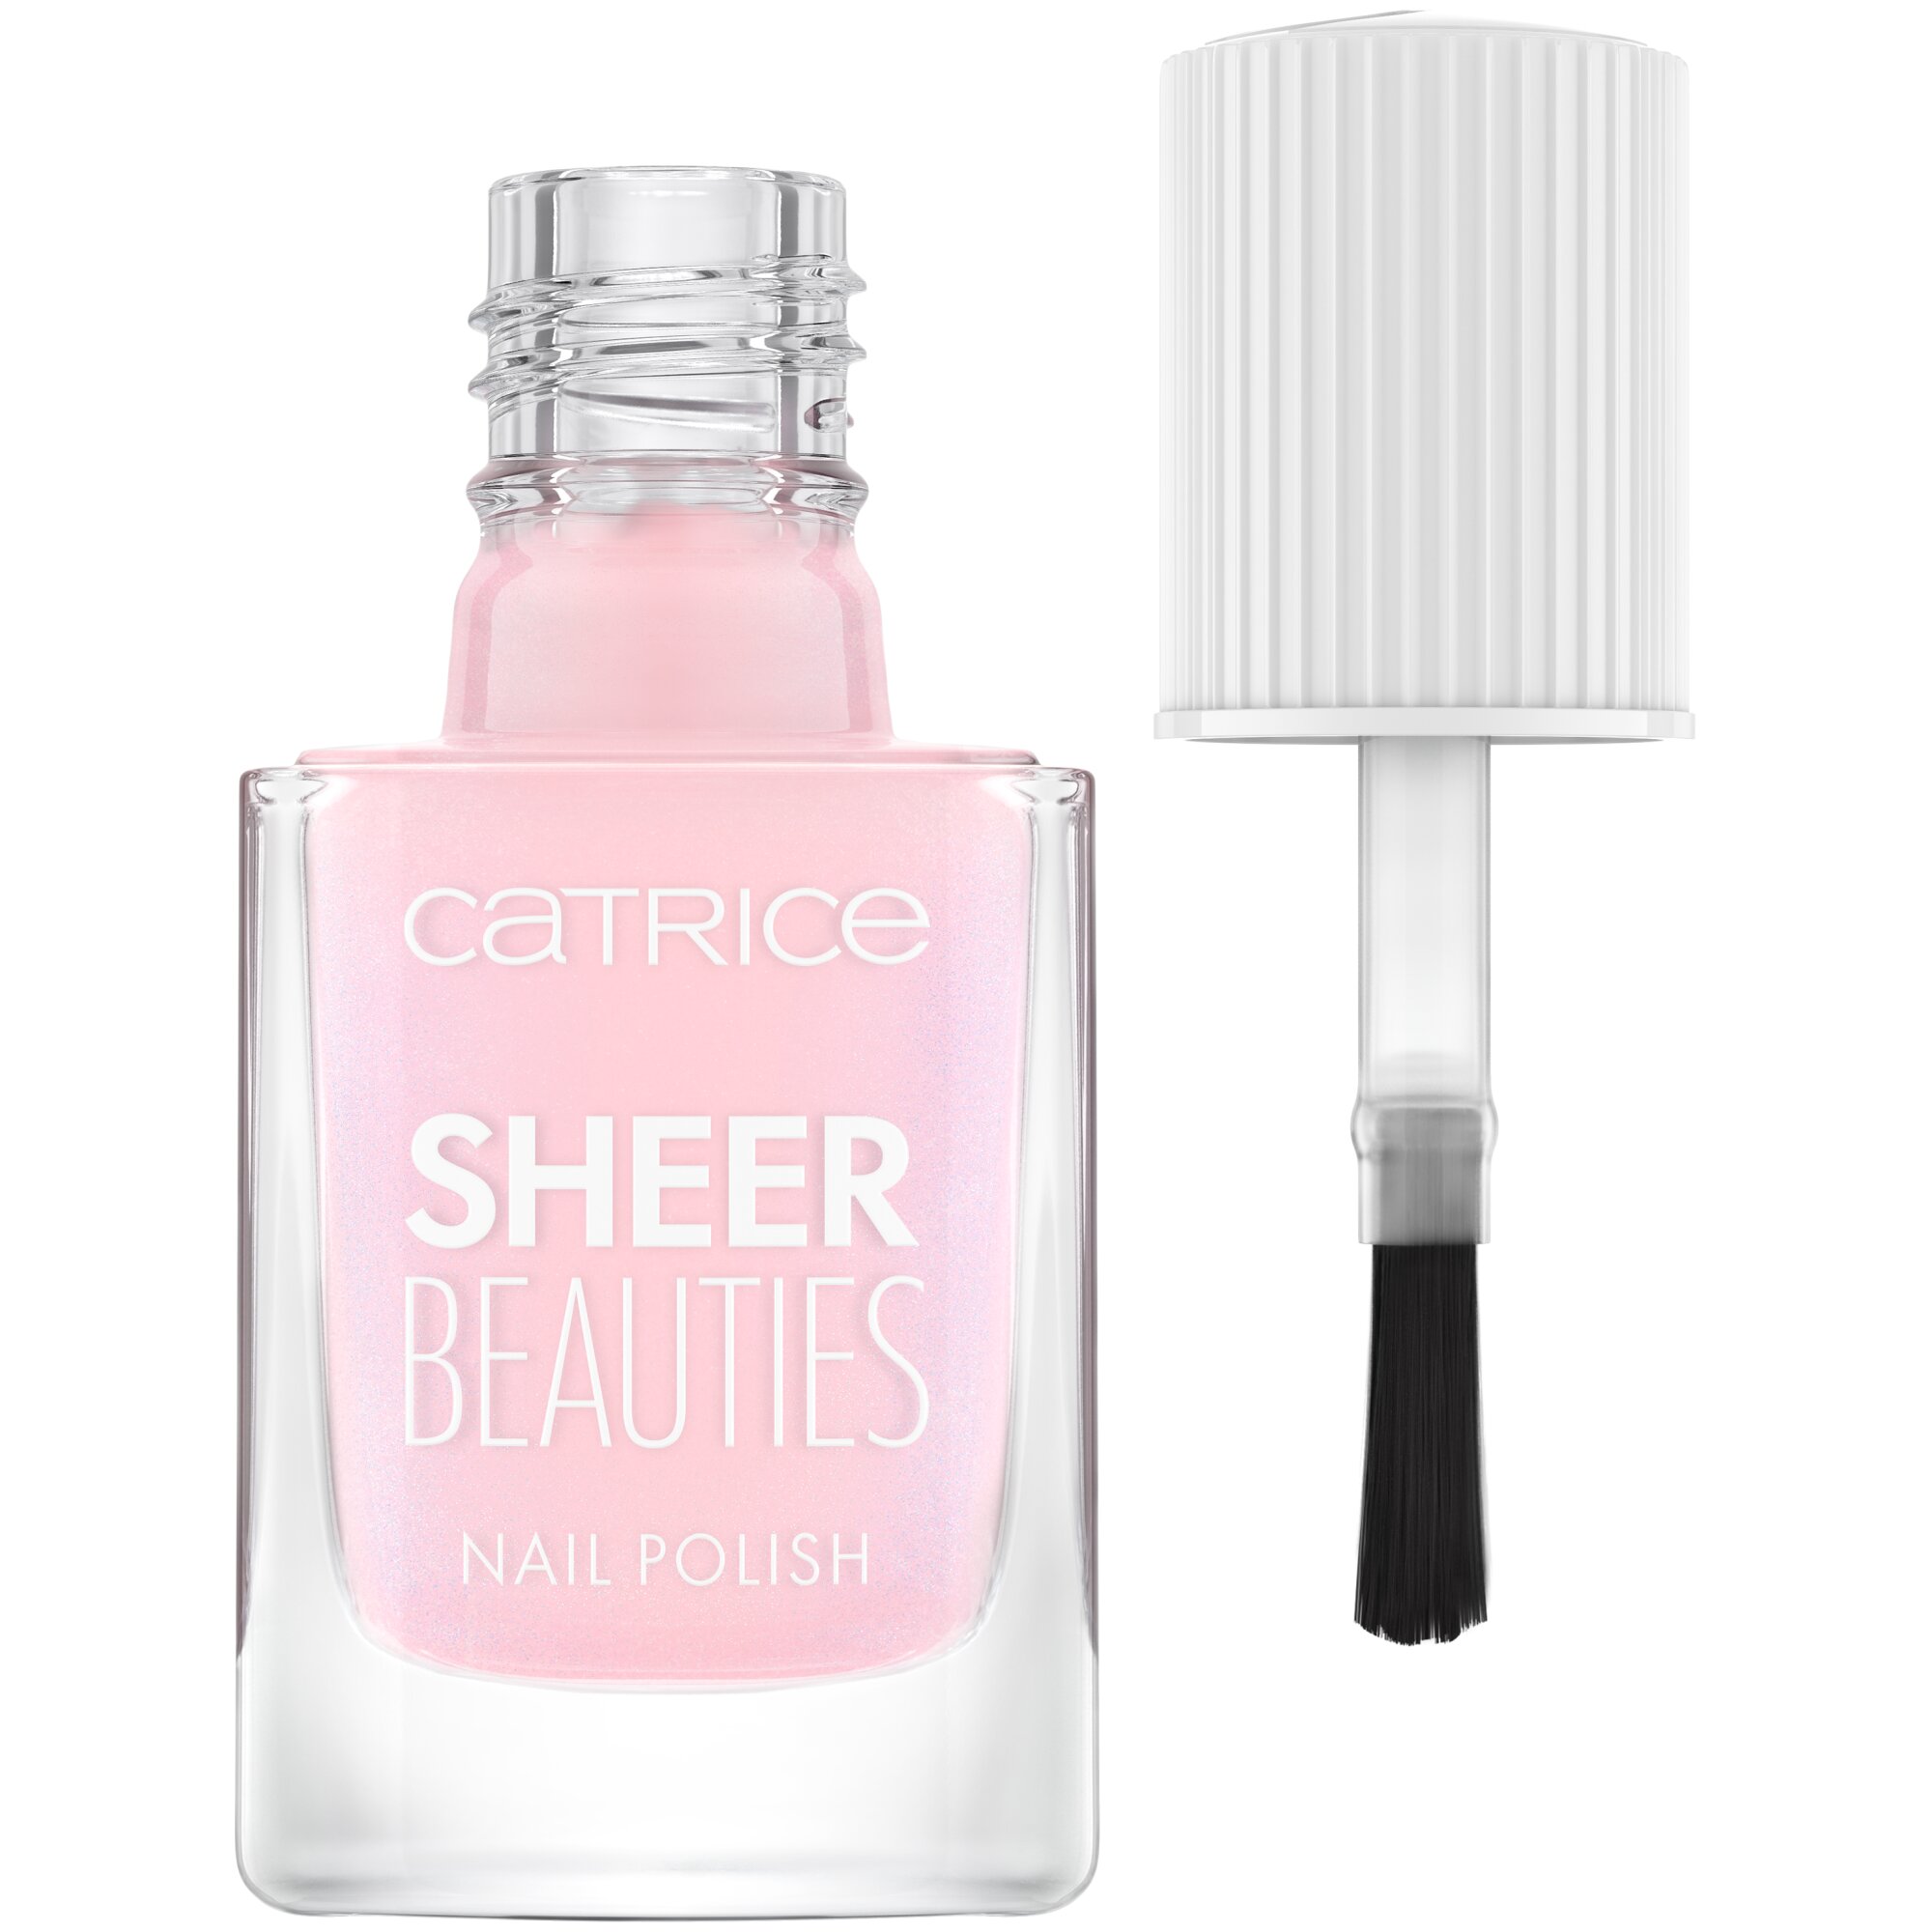 Lac pentru unghii Sheer Beauties, 040 - Fluffy Cotton Candy, 10.5 ml, Catrice